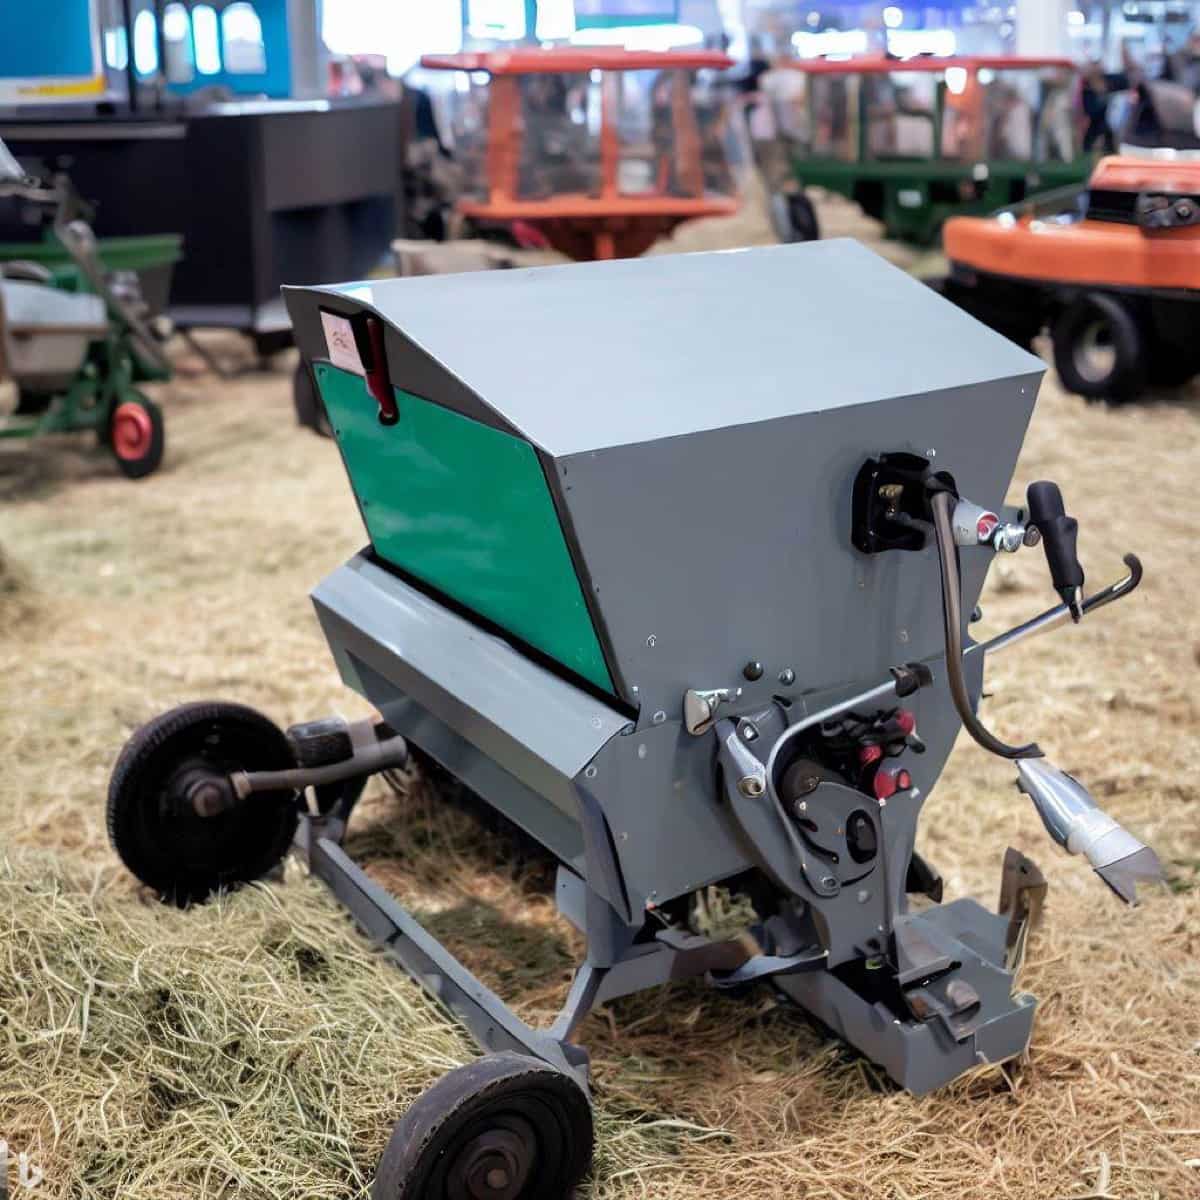 https://www.agrifarming.in/wp-content/uploads/Best-Chaff-Cutter-Machines-in-India2.jpg